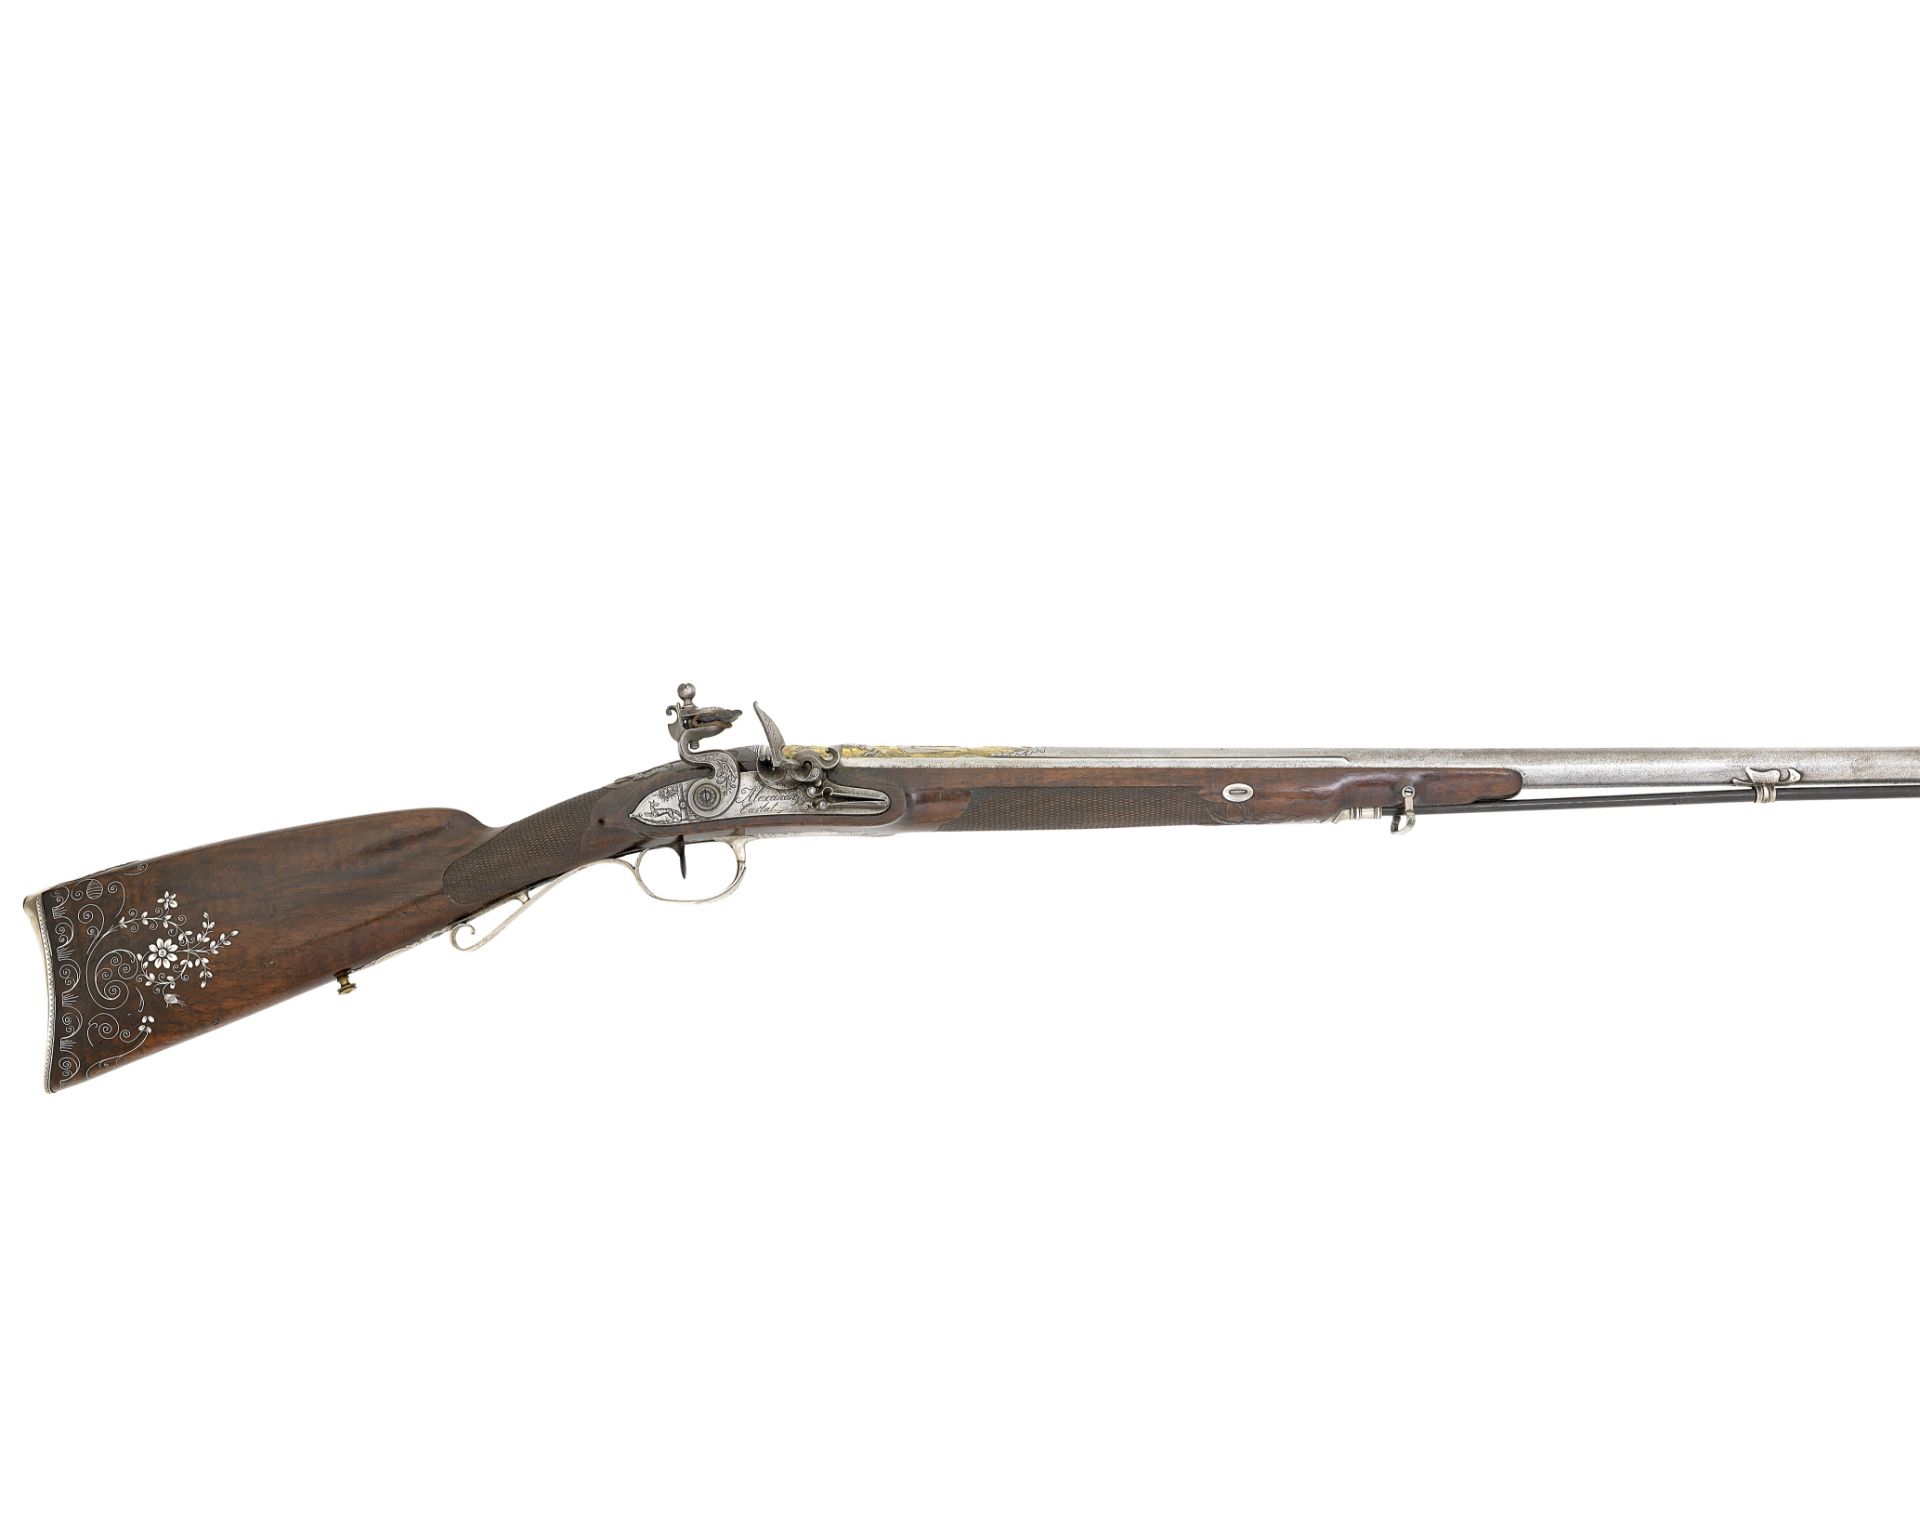 A French 16-Bore Flintlock Silver-Mounted Sporting Gun For The Export Market